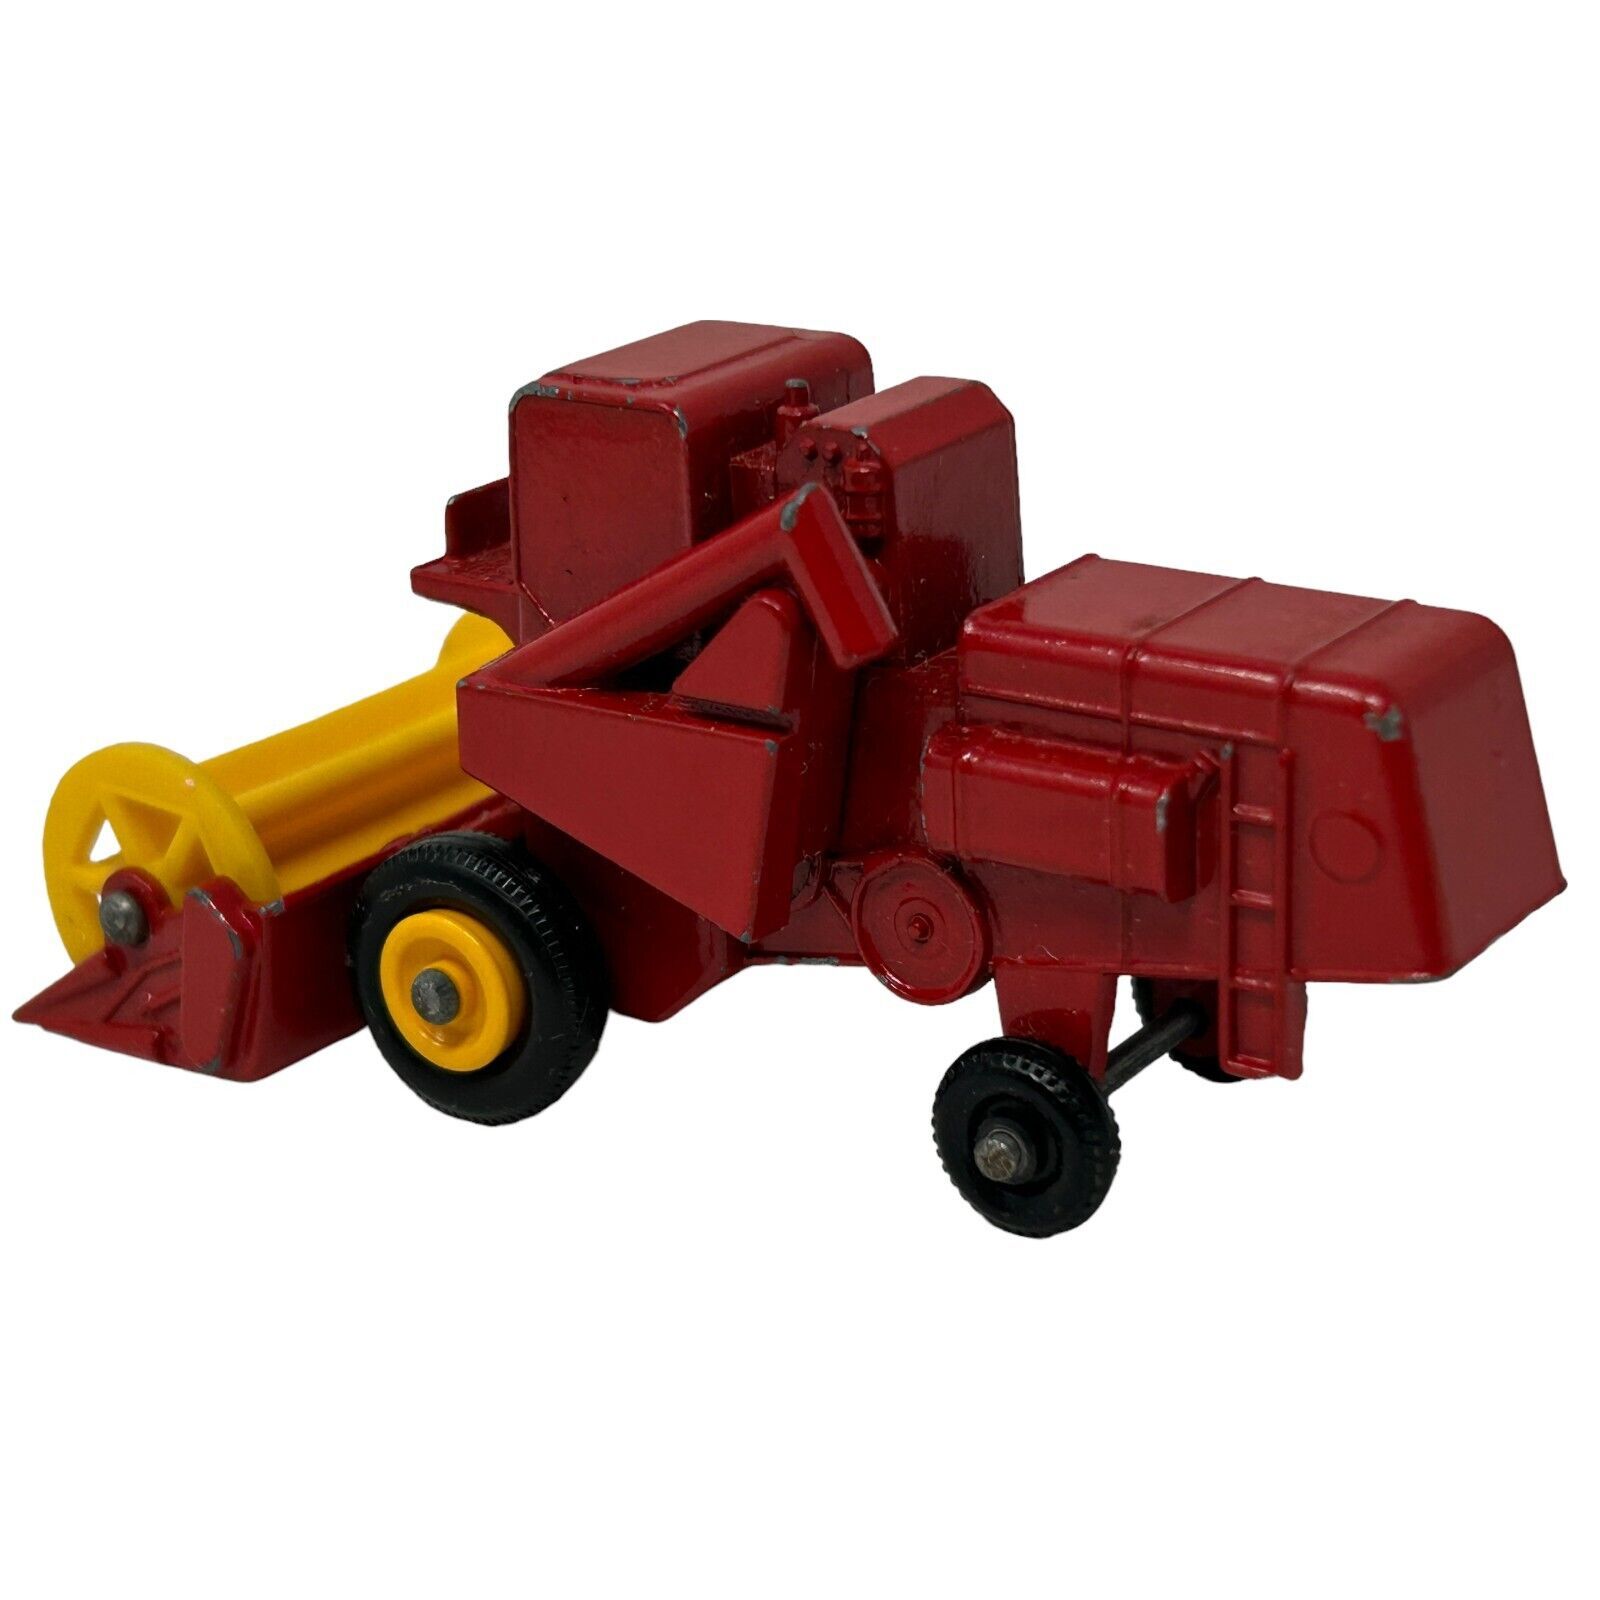 Matchbox 65 Claas Combine Harvester Diecast Toy Car Vintage Lesney Red England - £11.35 GBP